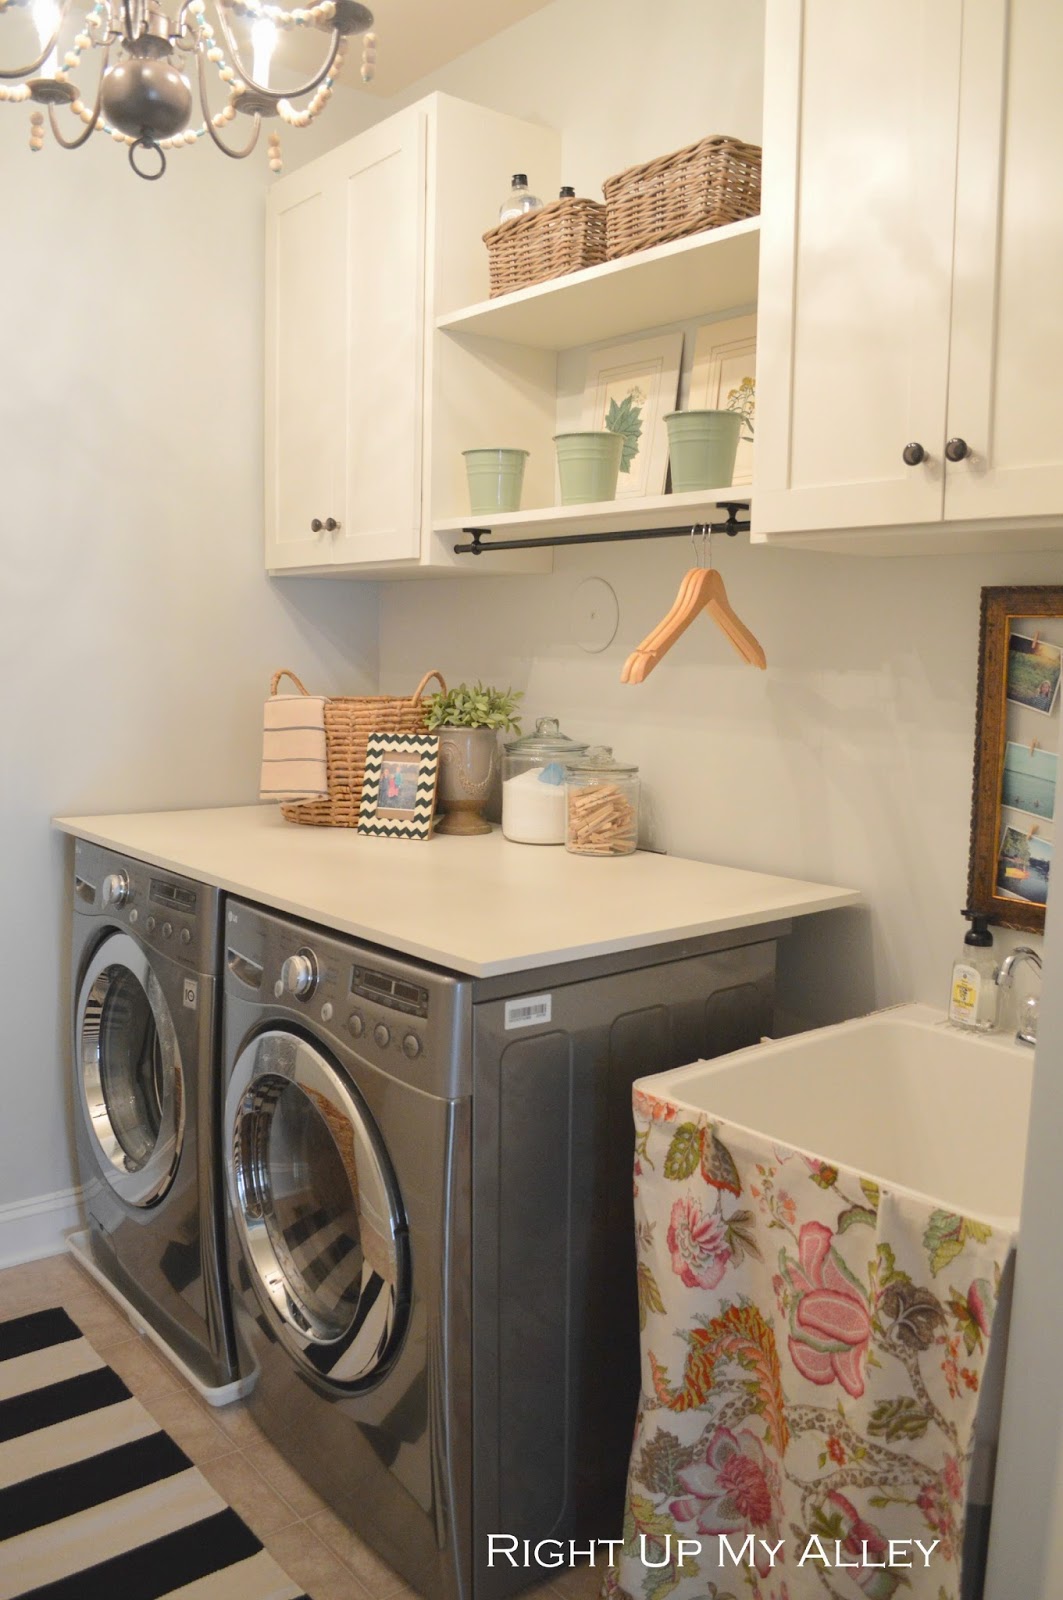 White cabinets flank the washer and dryer.